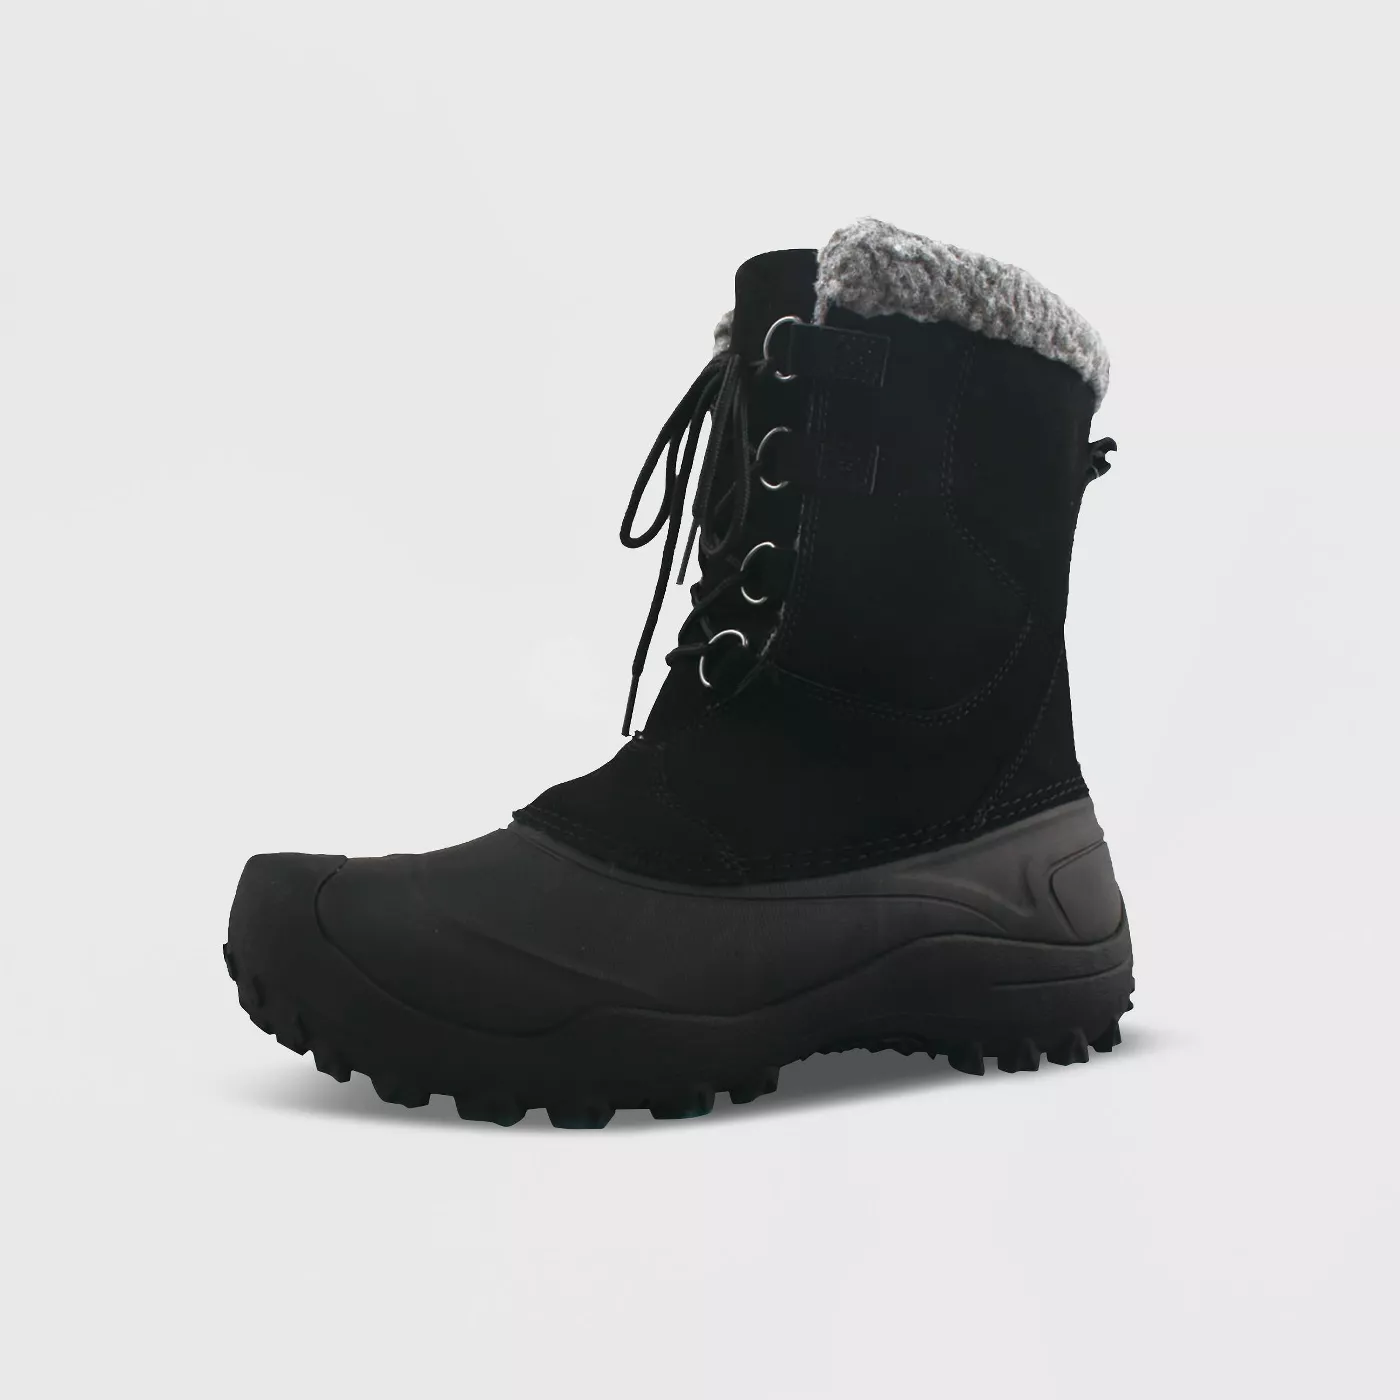 Men's Les Winter Boots - Goodfellow & Co.™ - image 1 of 3